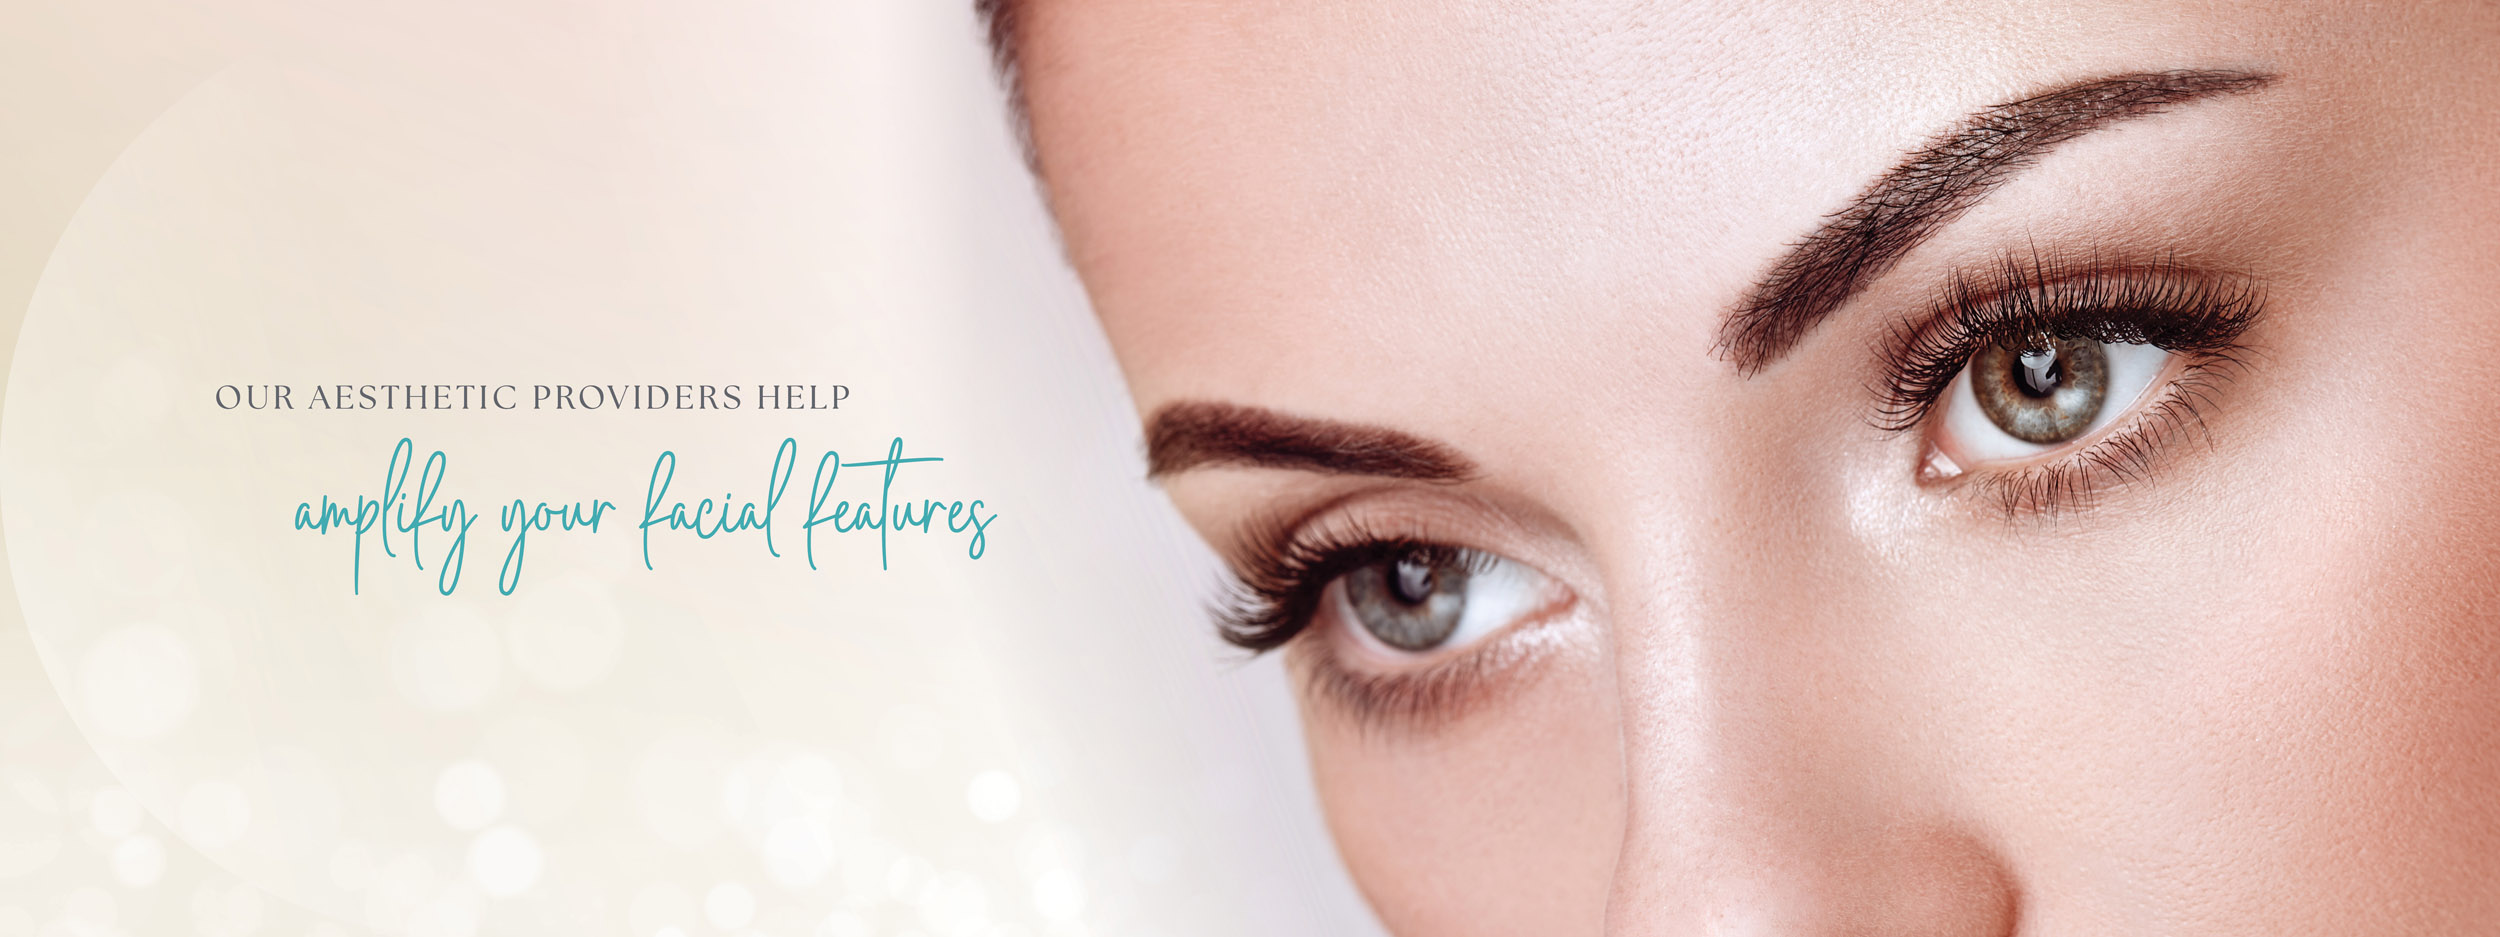 Brow Lift and Lash services from Refresh Aesthetic Center in Whitefish Bay WI